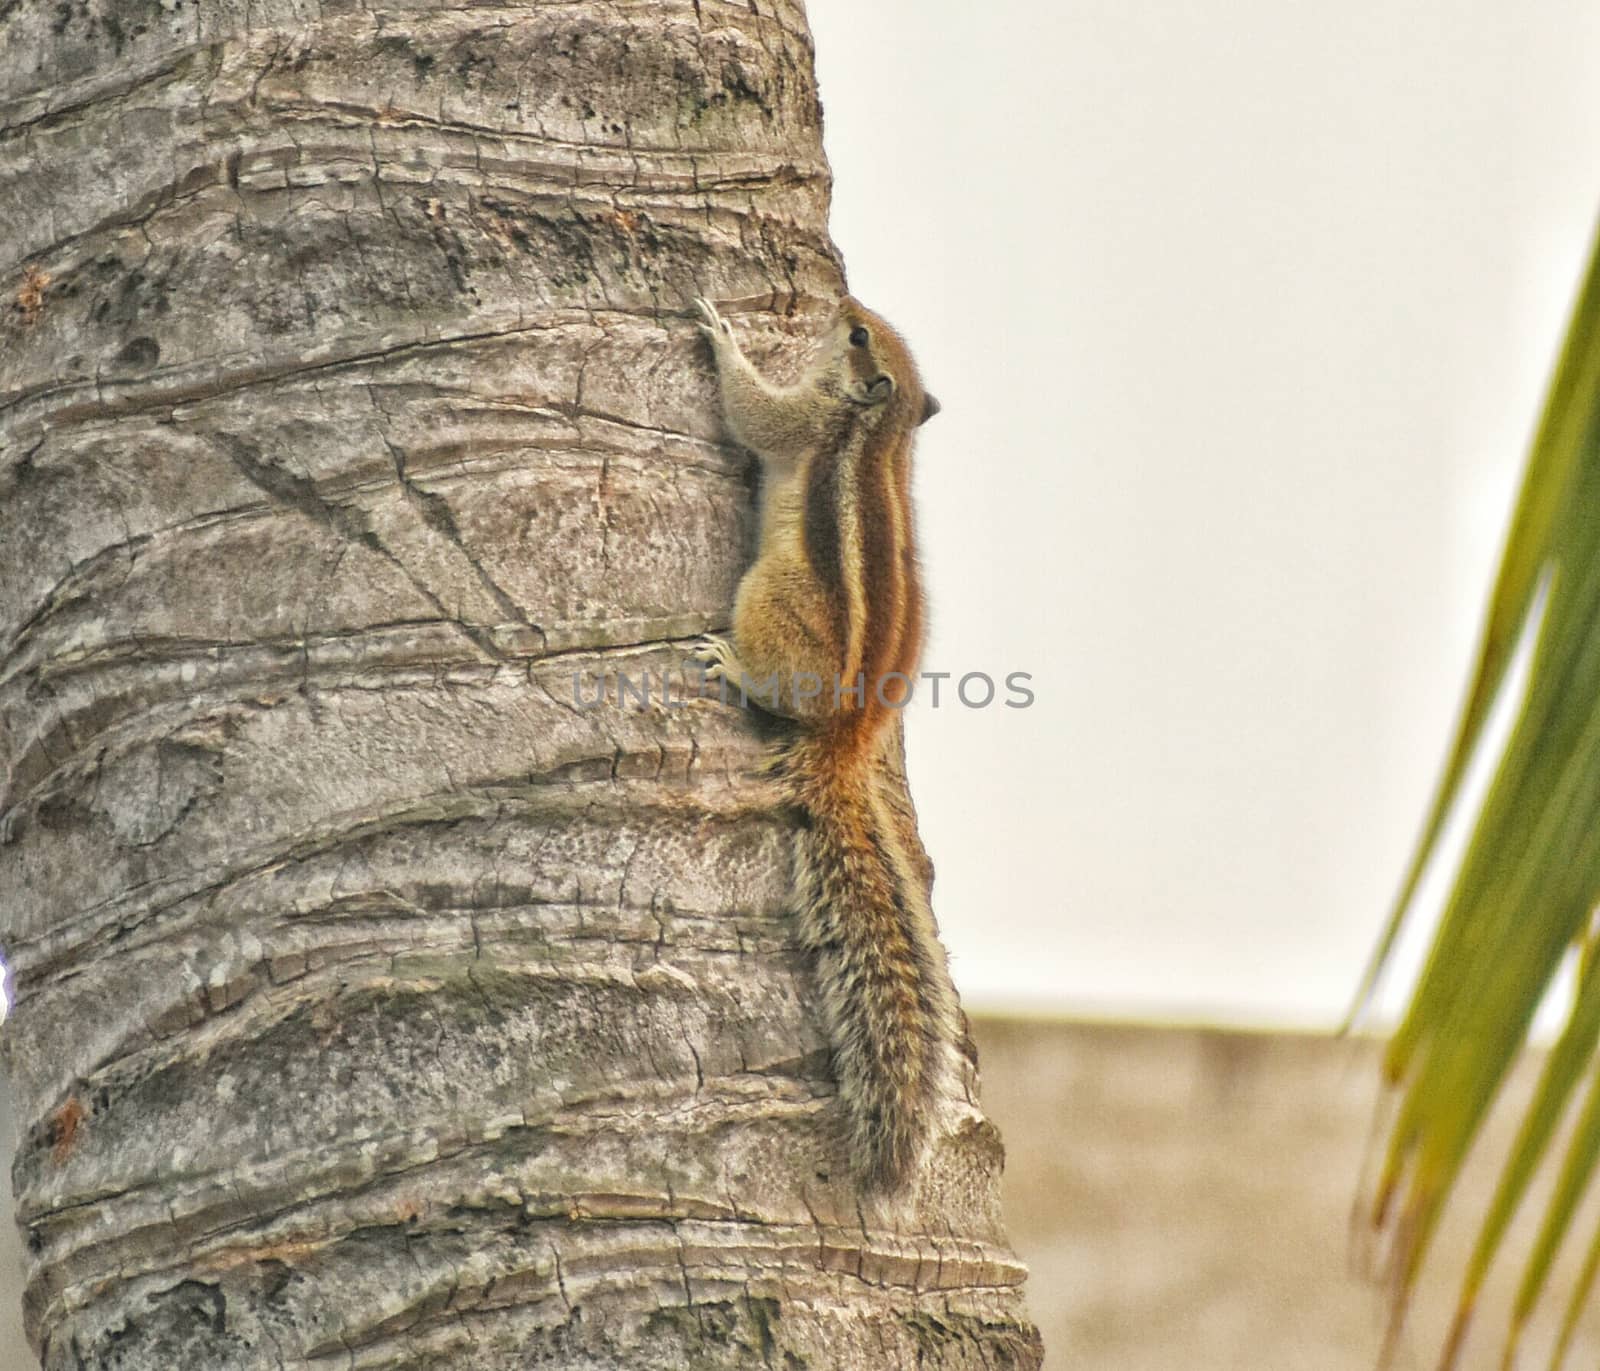 A very fast five stripped squirrel climbing on a coconut tree